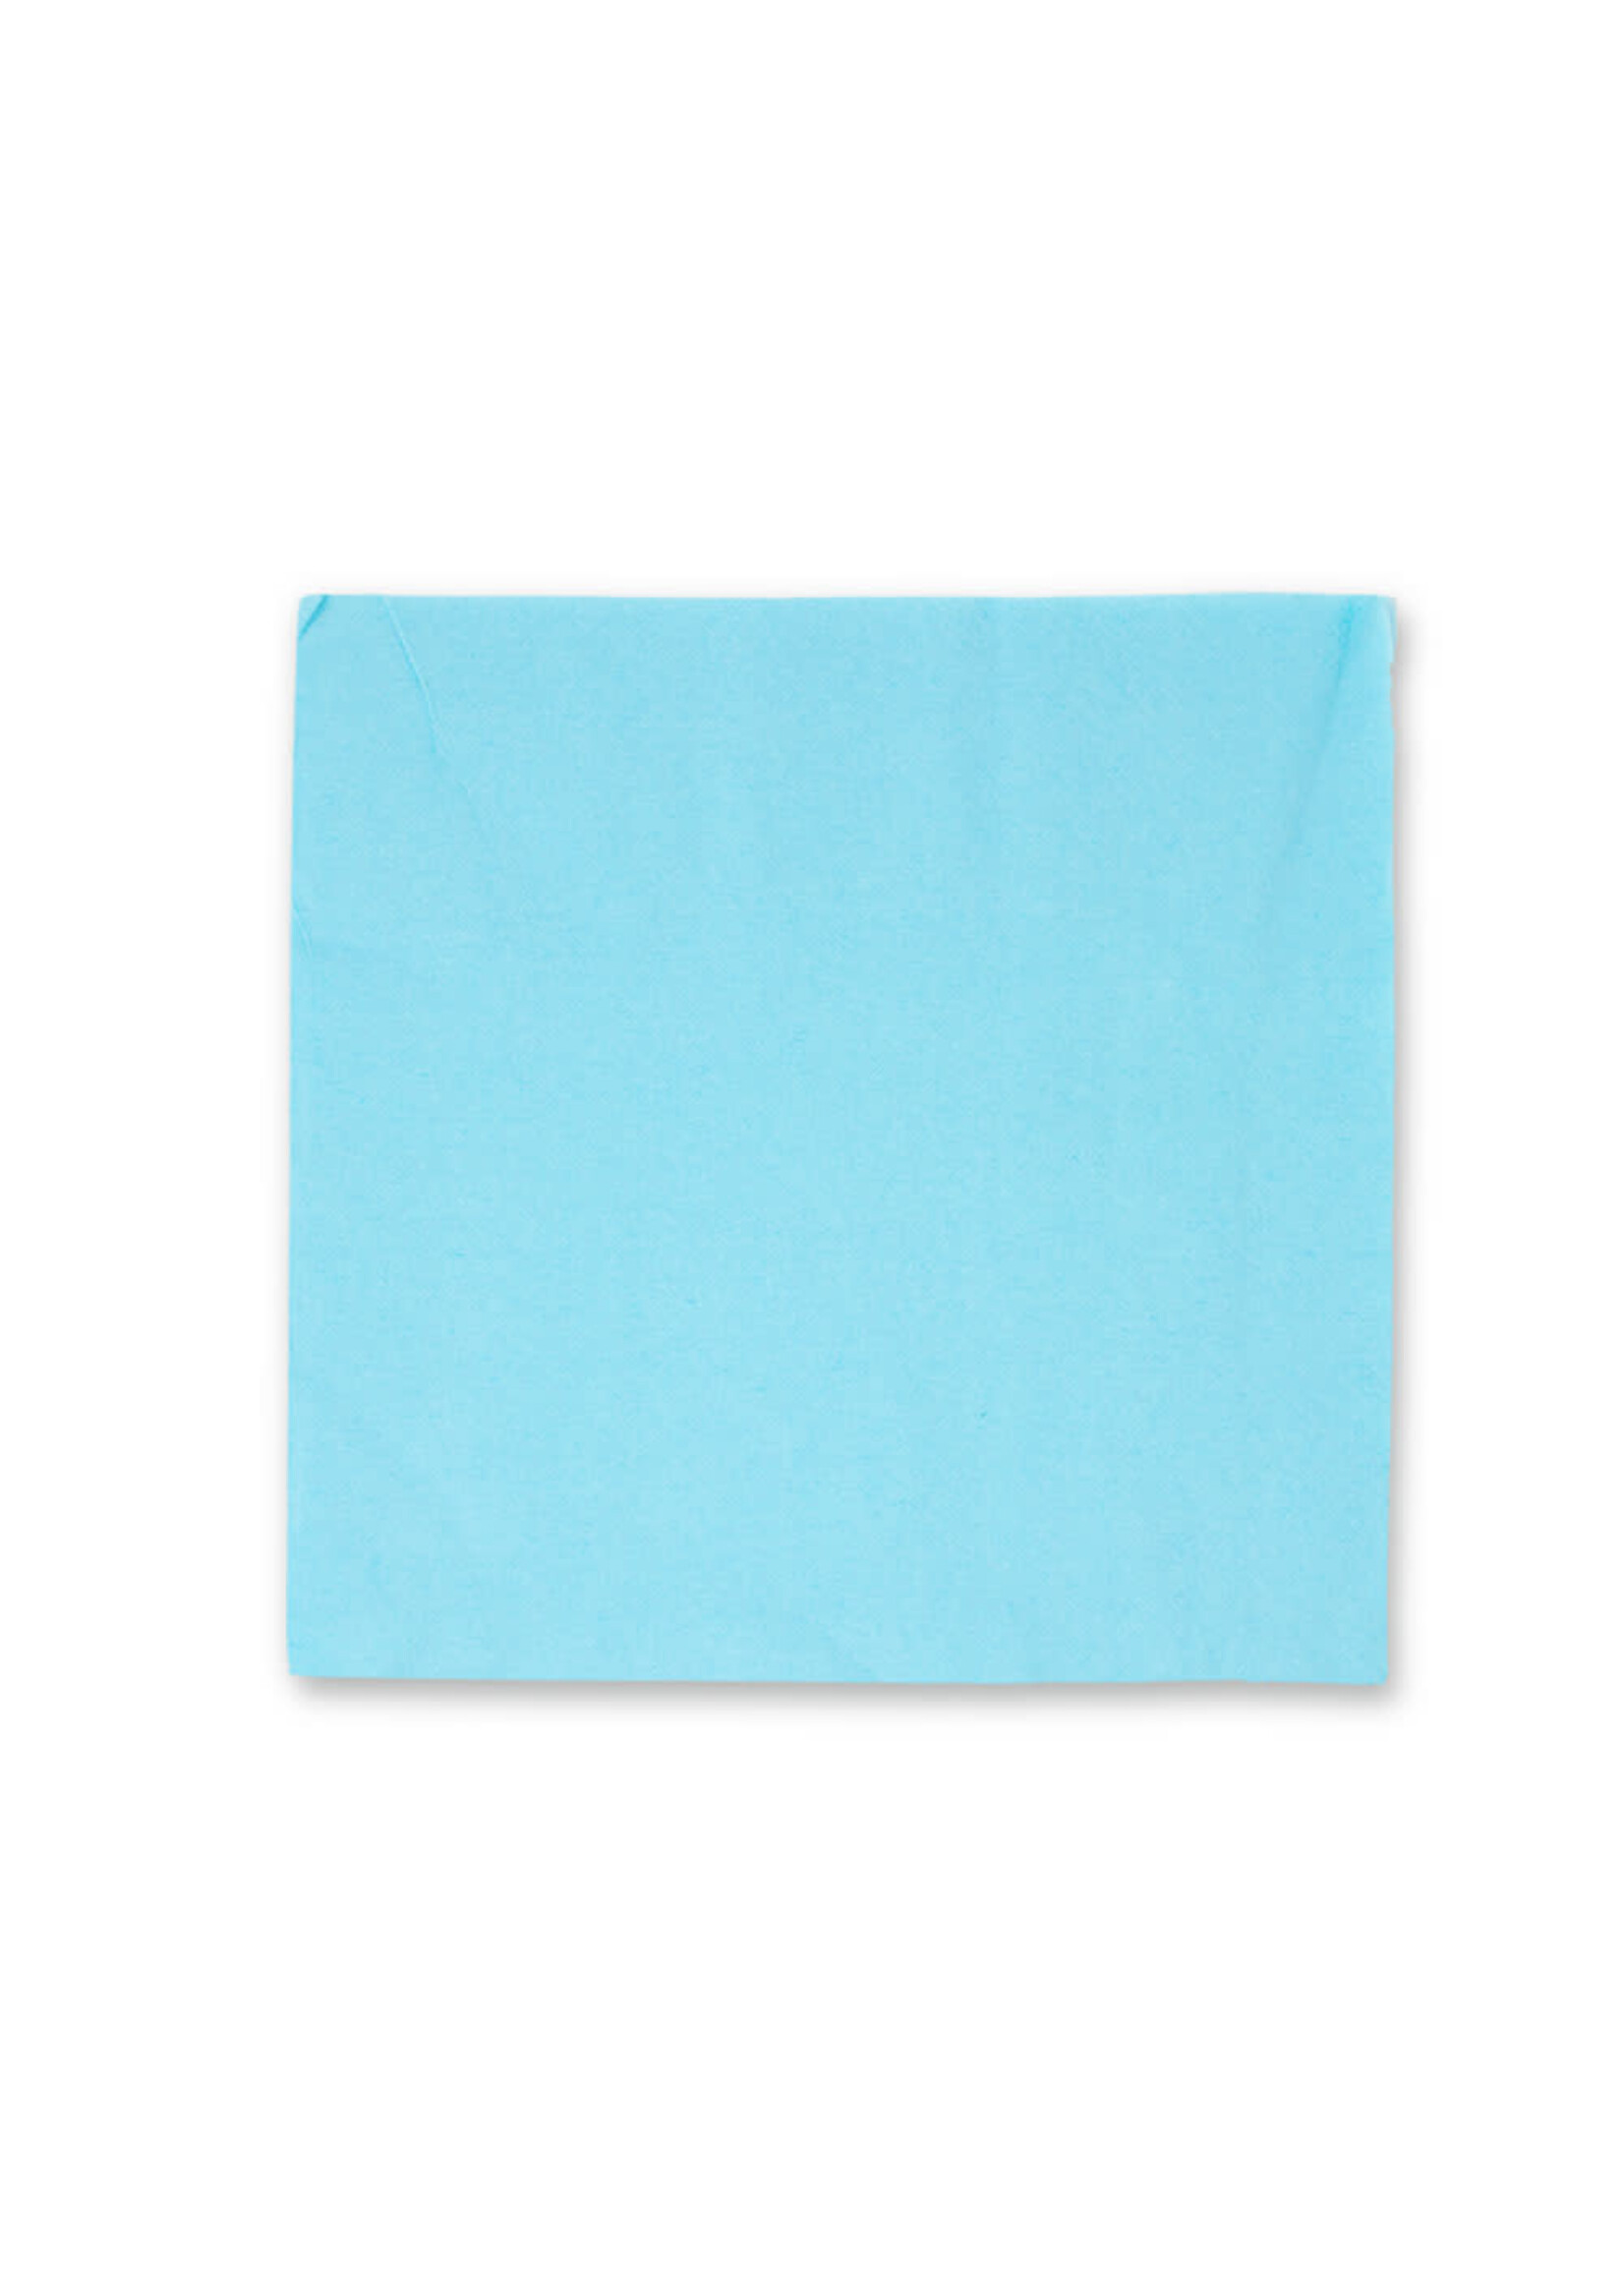 LUNCH NAPKIN 50CT 2PLY LT BLUE